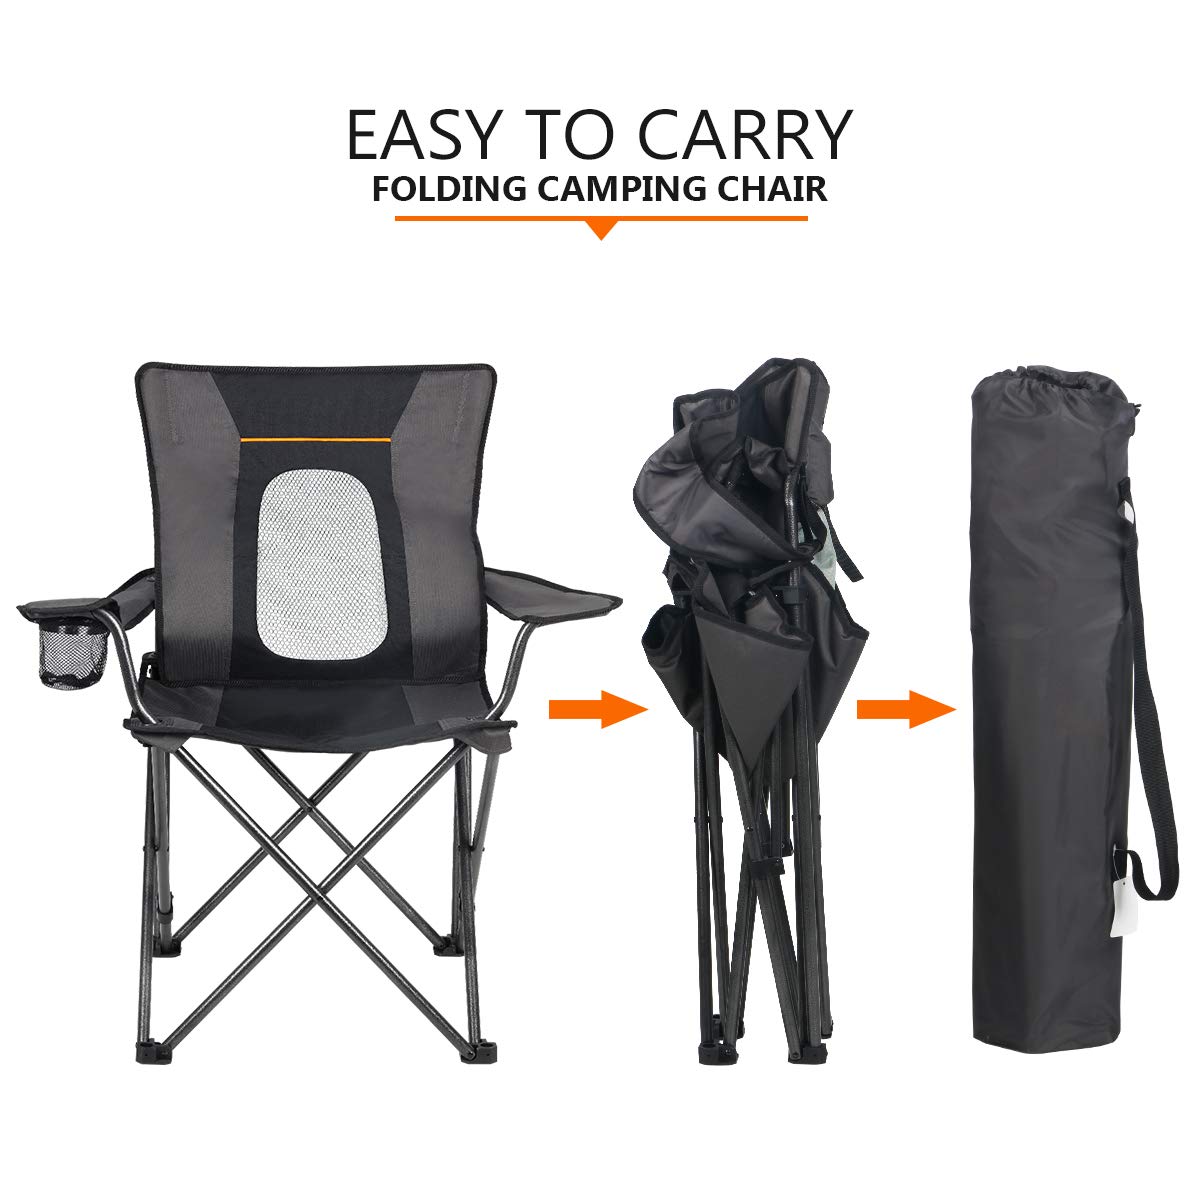 PORTAL Folding Camping Chair with Lumbar Back Support Heavy Duty Portable Quad Chairs, Cup Holder, Support 300 LBS